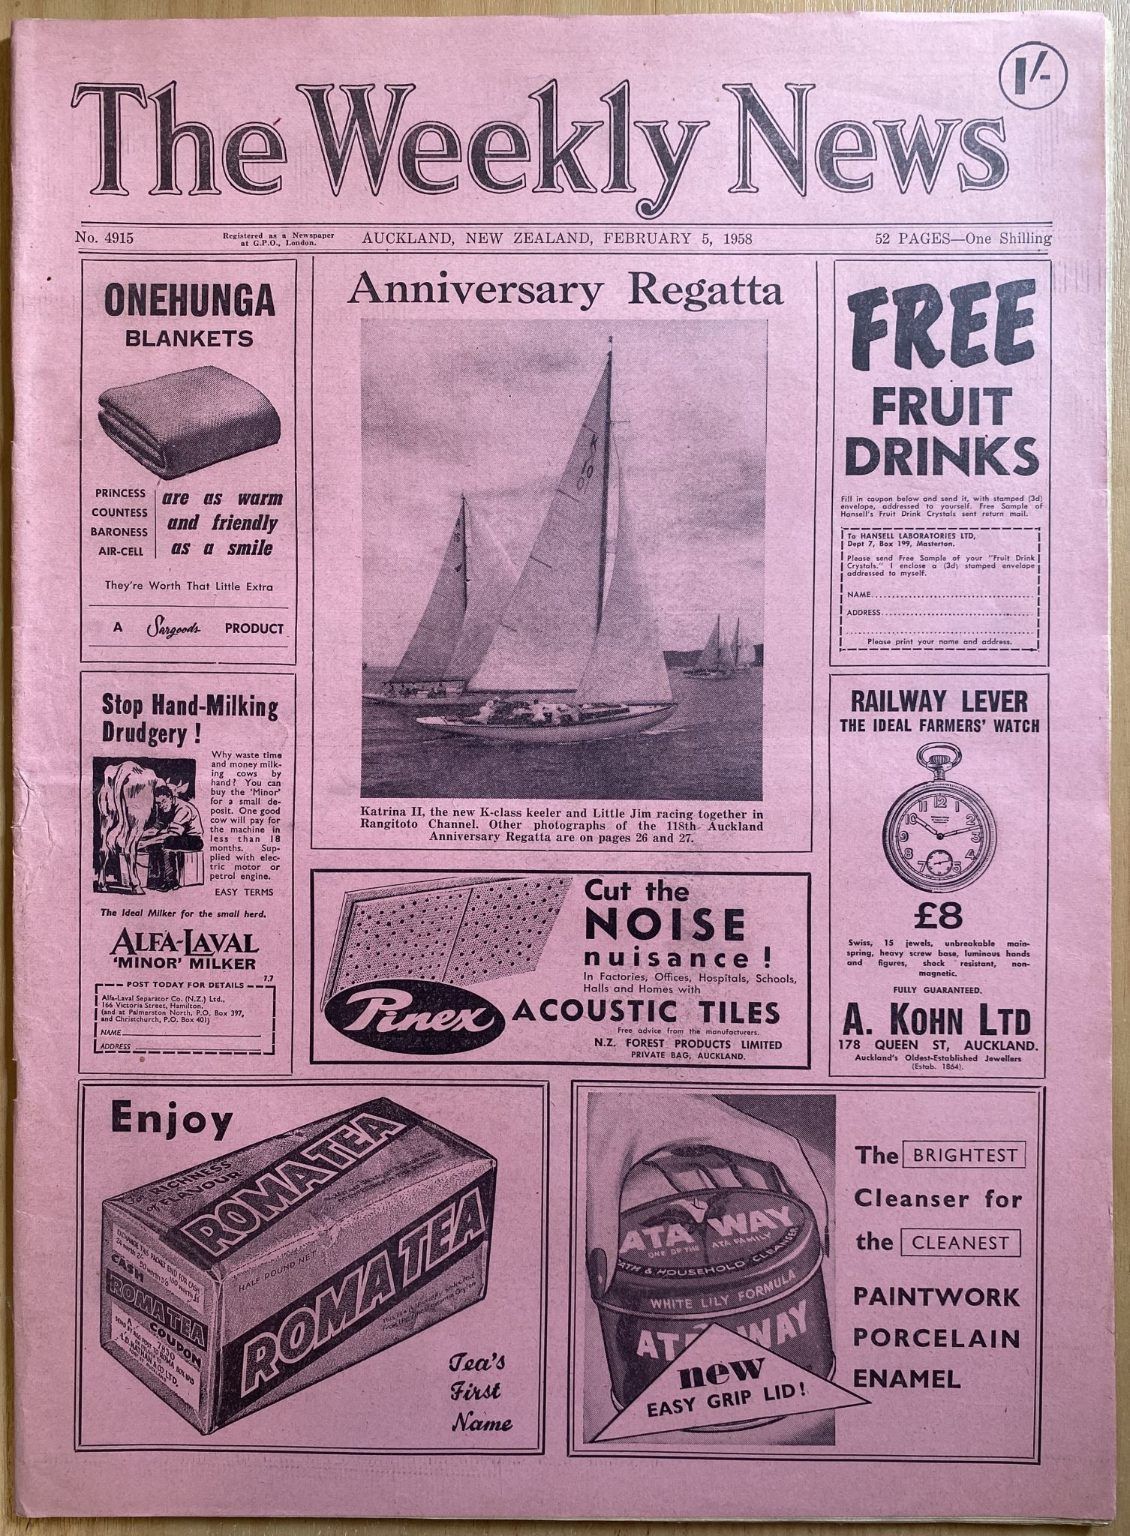 OLD NEWSPAPER: The Weekly News, No. 4915, 5 February 1958